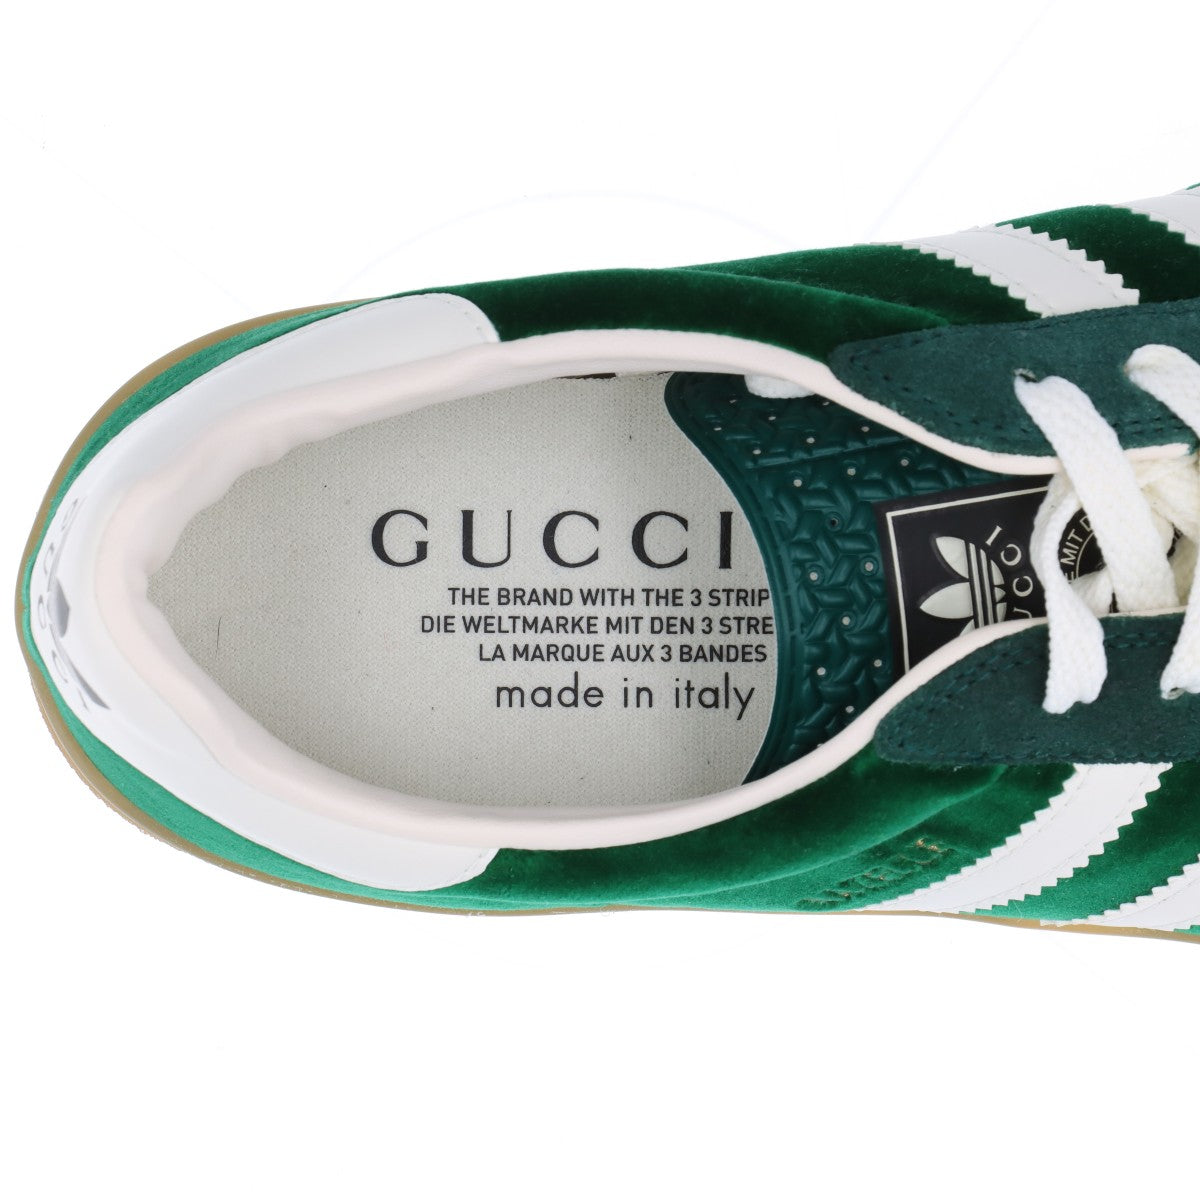 Gucci x Adidas Gasel Belloor x Leather Trainers 24.5cm  Green 707848    Box Bag With